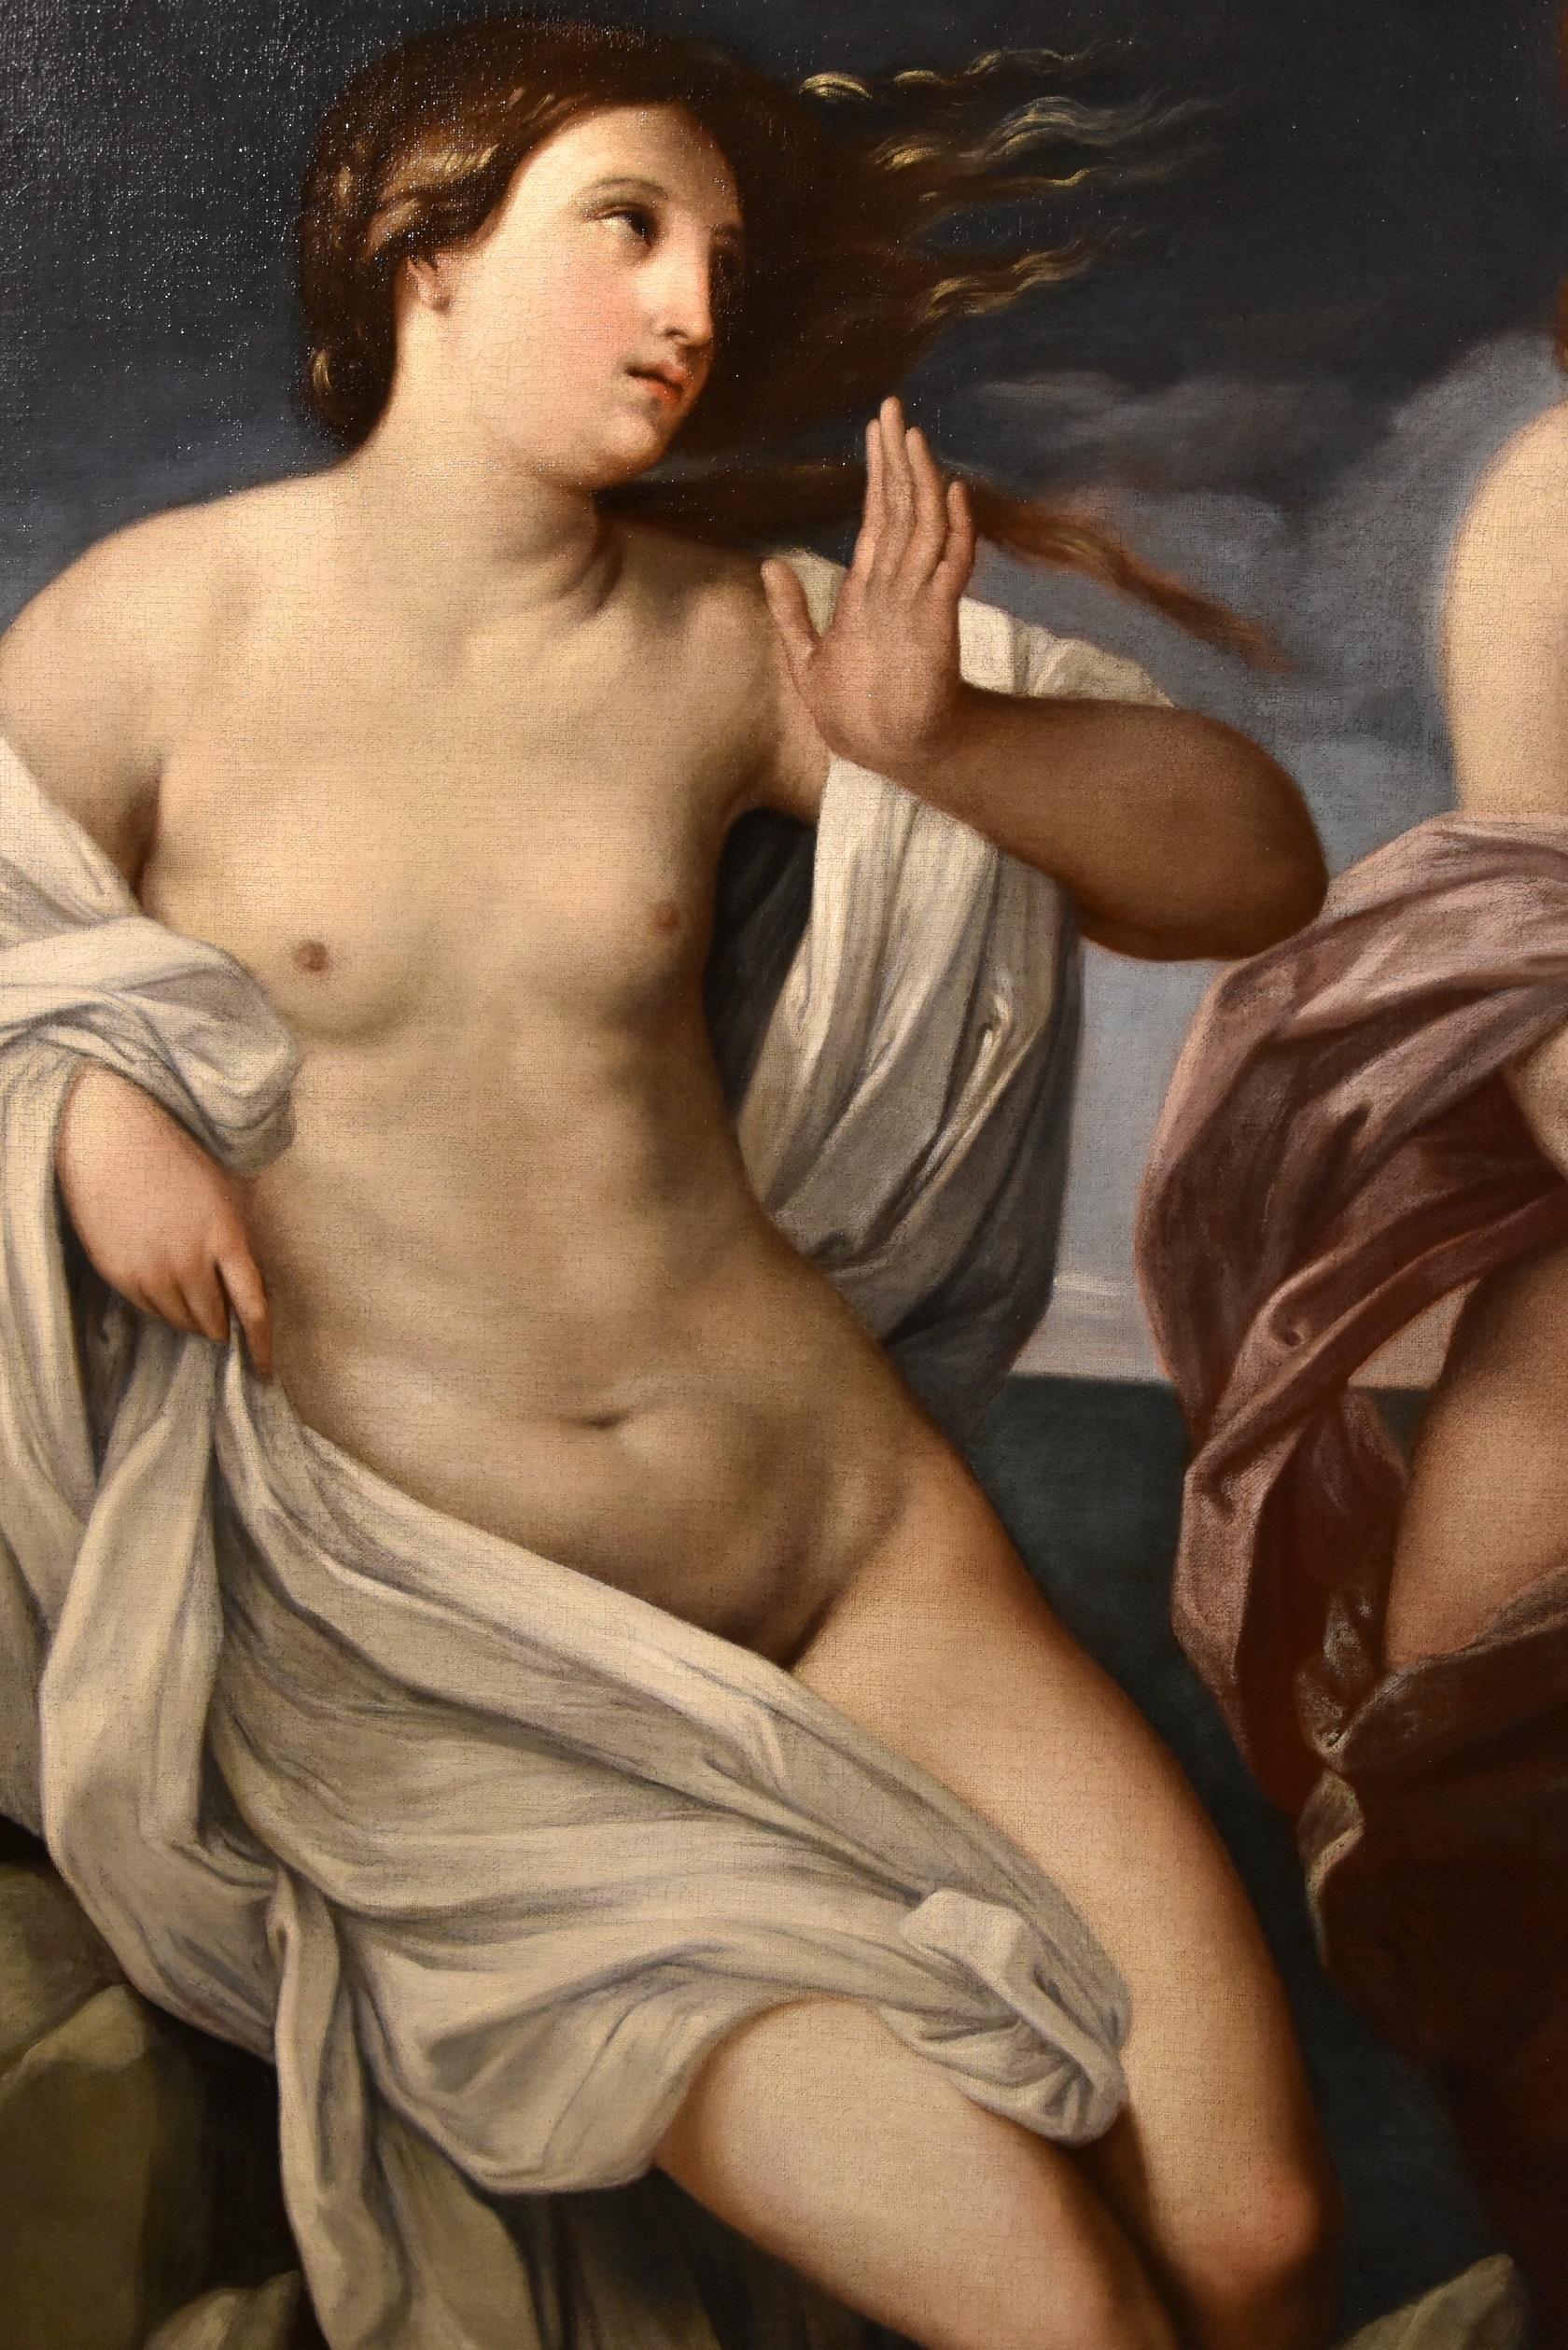 Workshop of Guido Reni (Bologna, 1575 - 1642)
Attributed to Sebastiano Brunetti (Bologna 1610 c. - 1649)
The Princess of Crete Ariadne on the island of Naxos

With the expertise of Prof. Emilio Negro (Bologna)

Oil on canvas - cm. 139 x 100 - in an